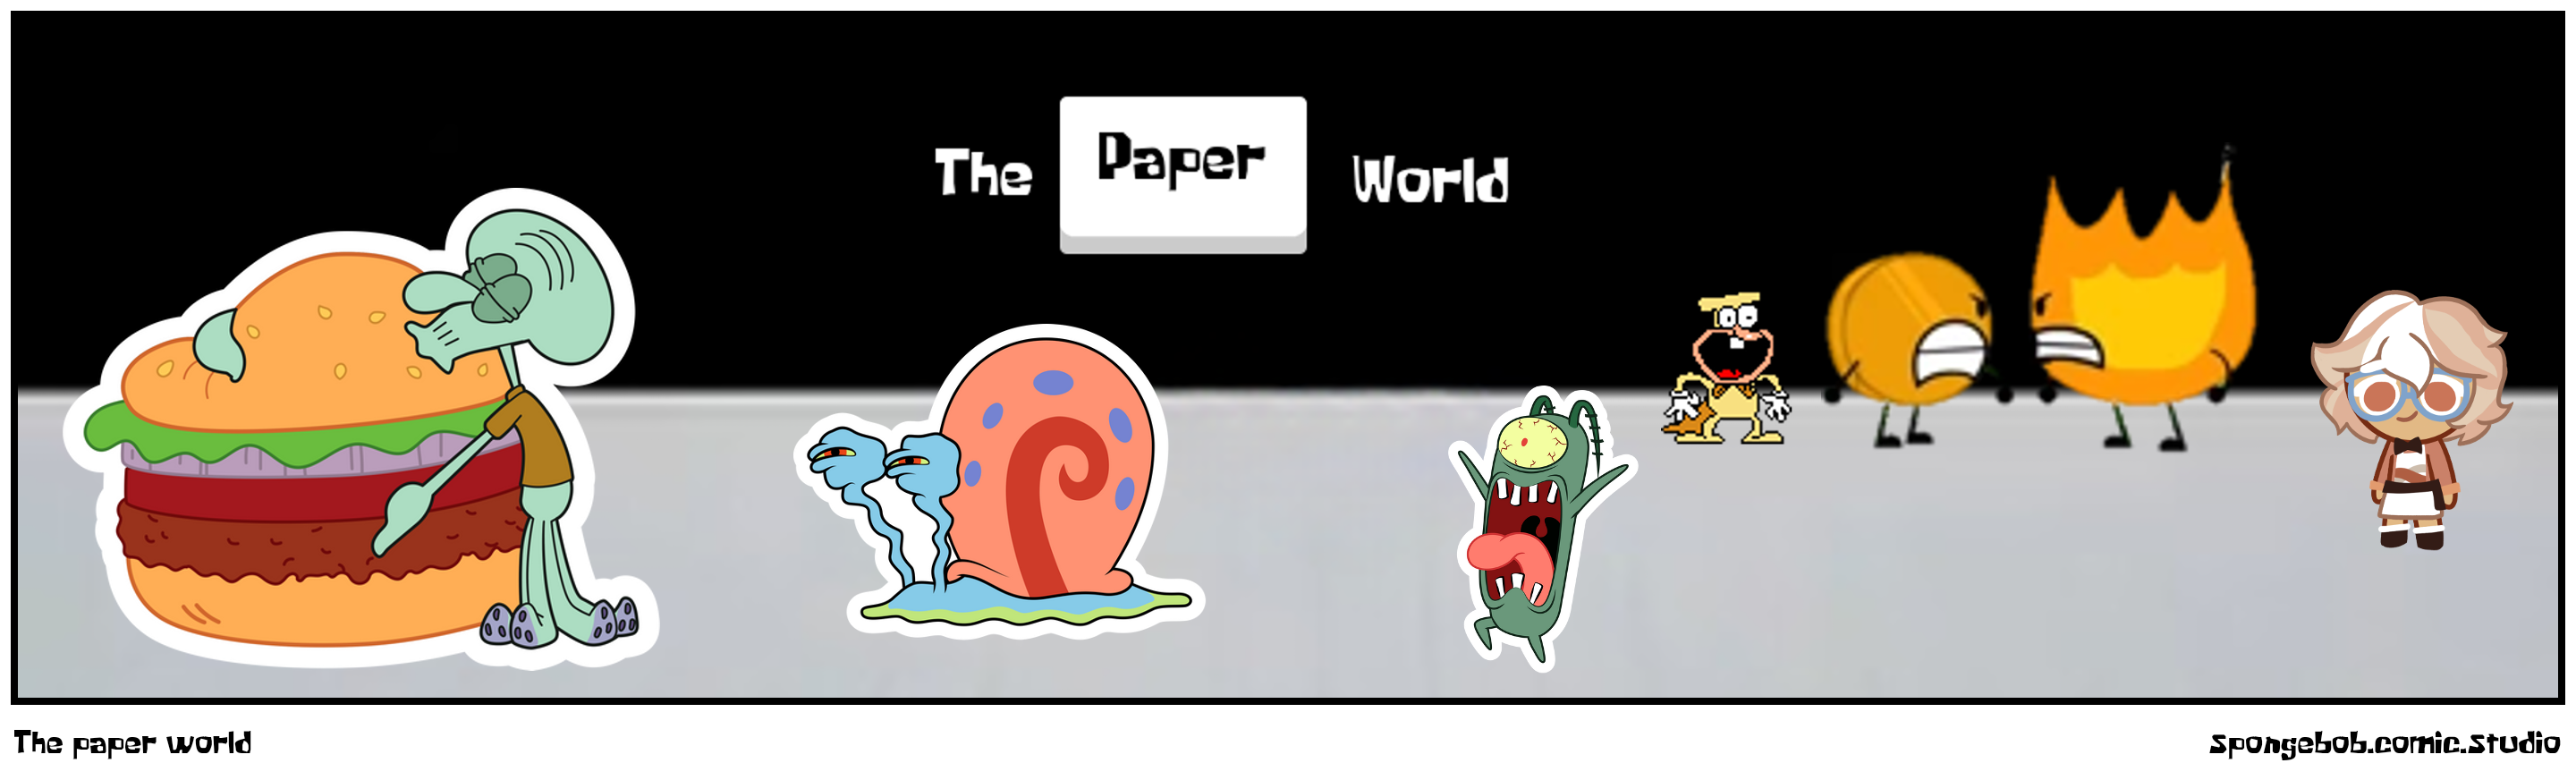 The paper world